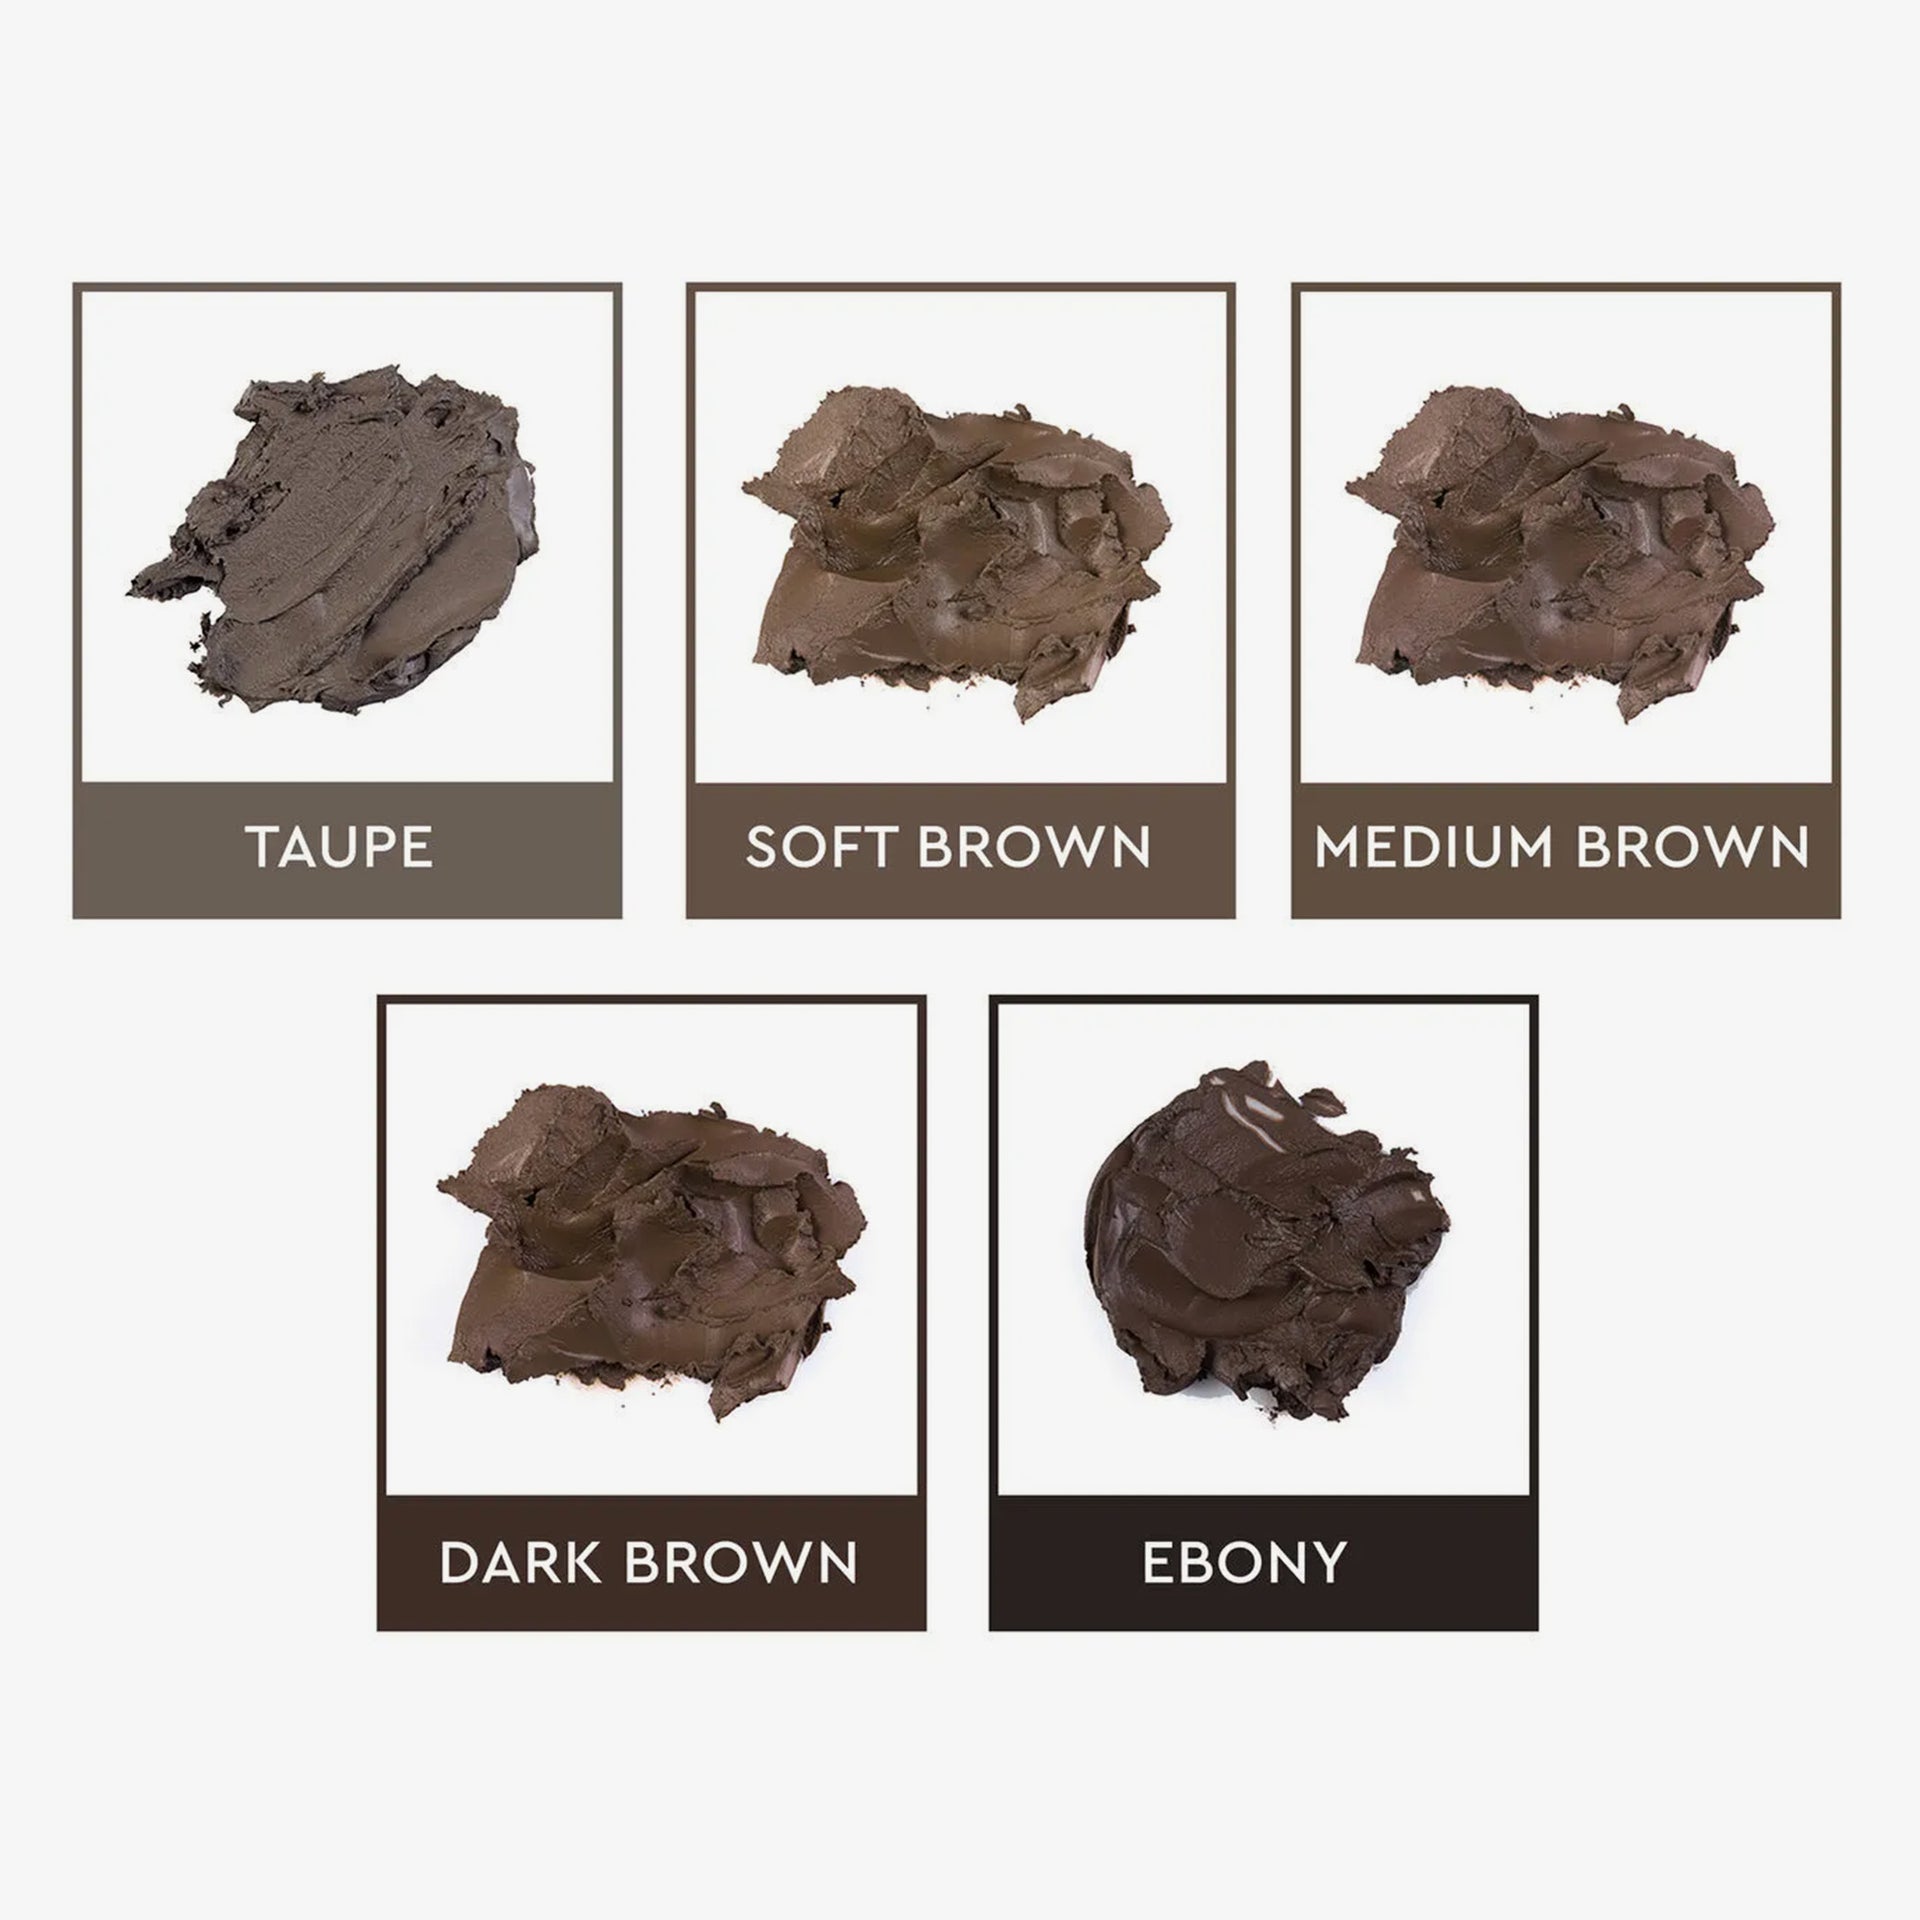 Summer Proof Brow Kit Swatches 